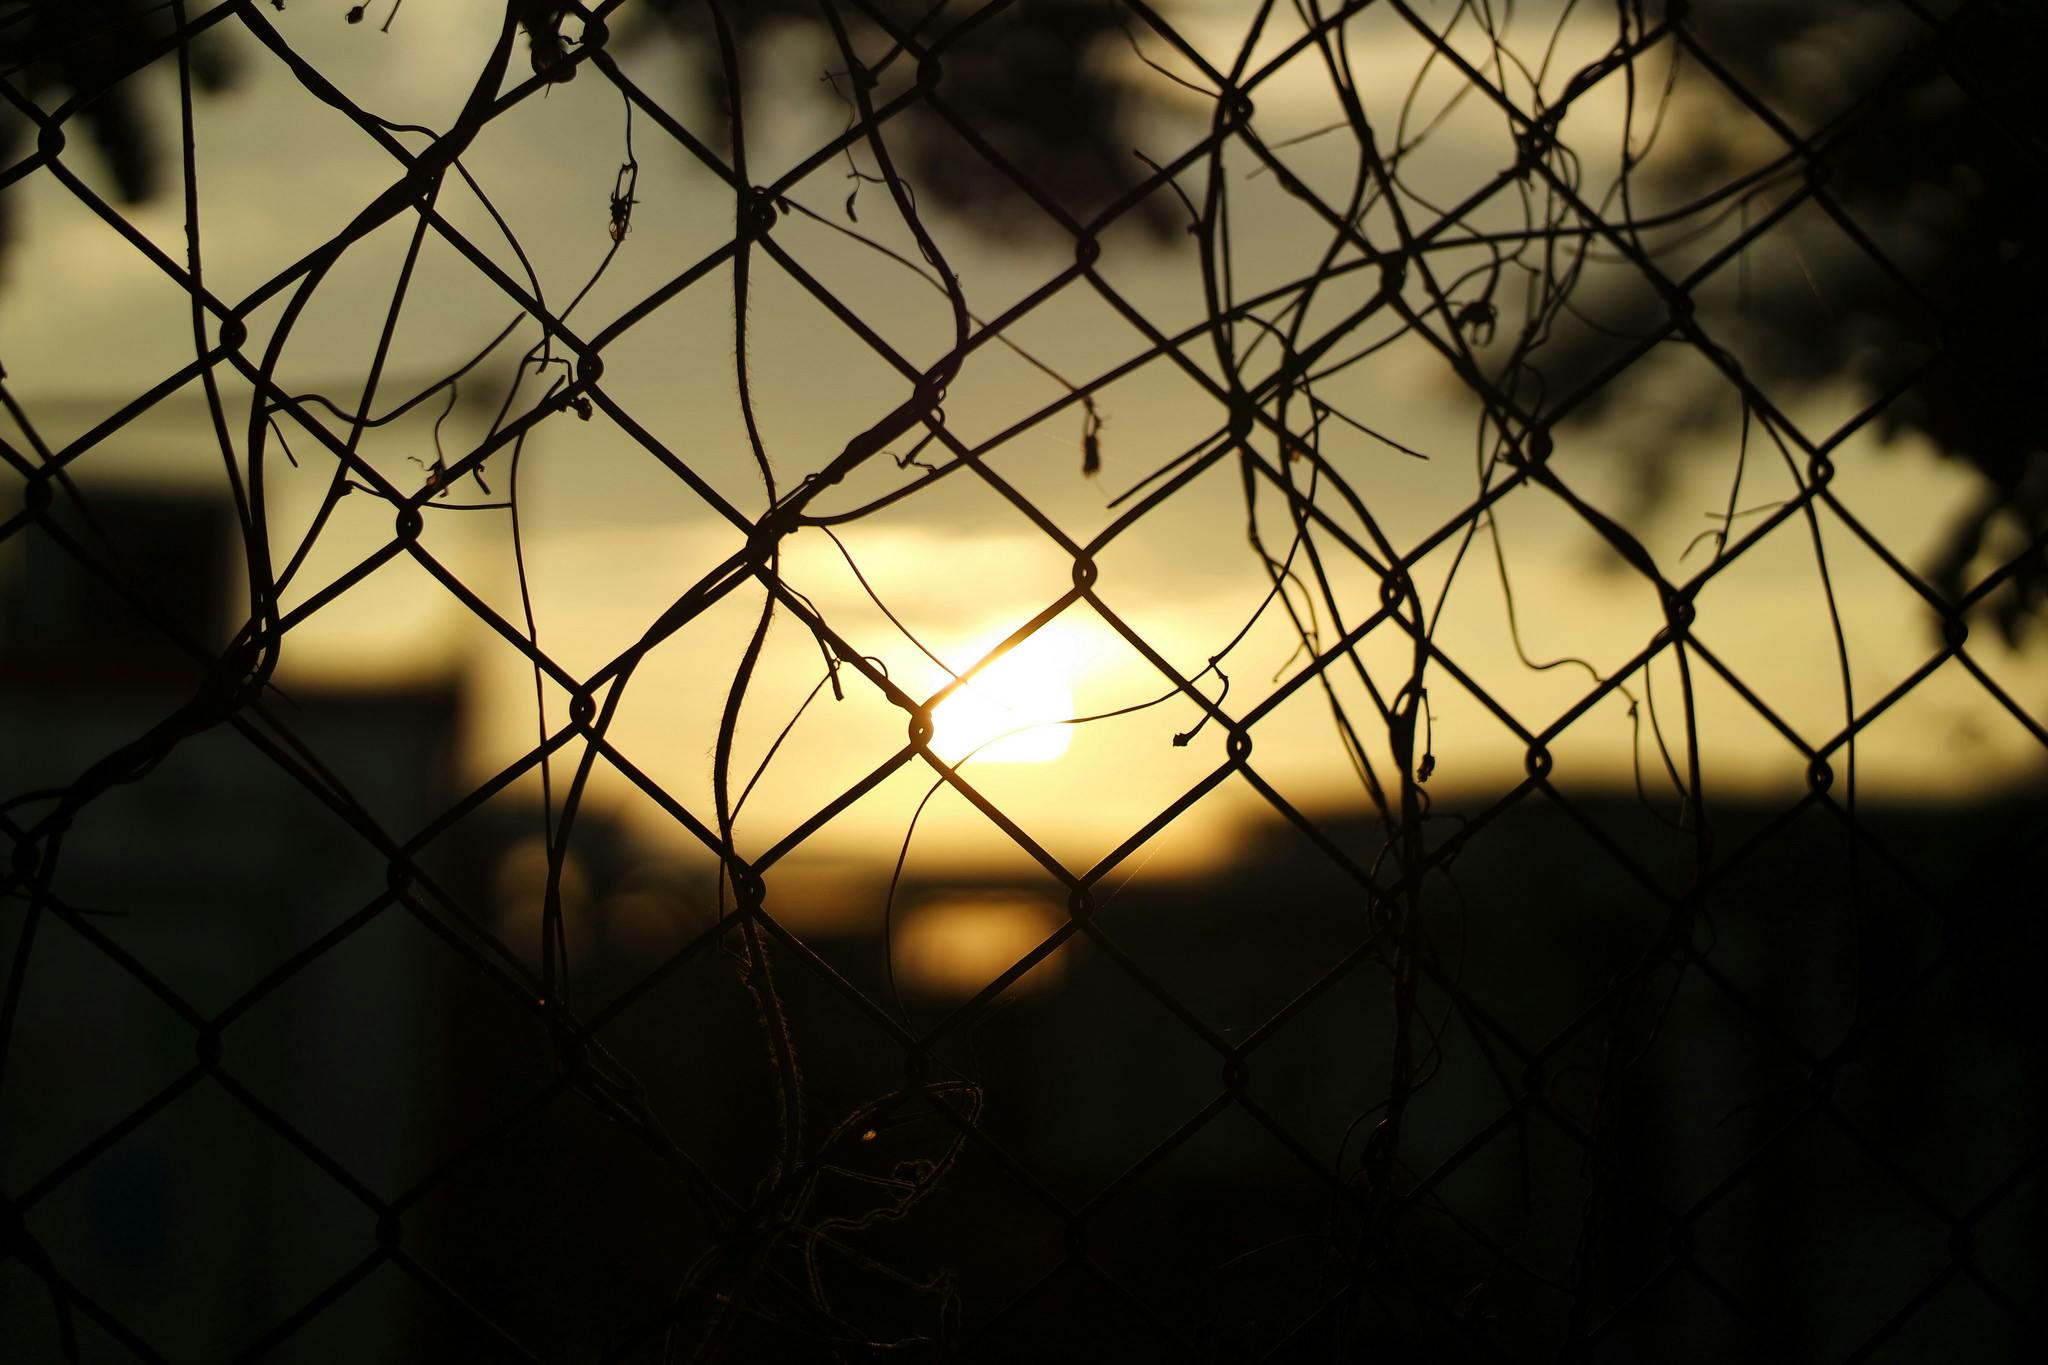 a close up of the sunset seen through the chain link fence